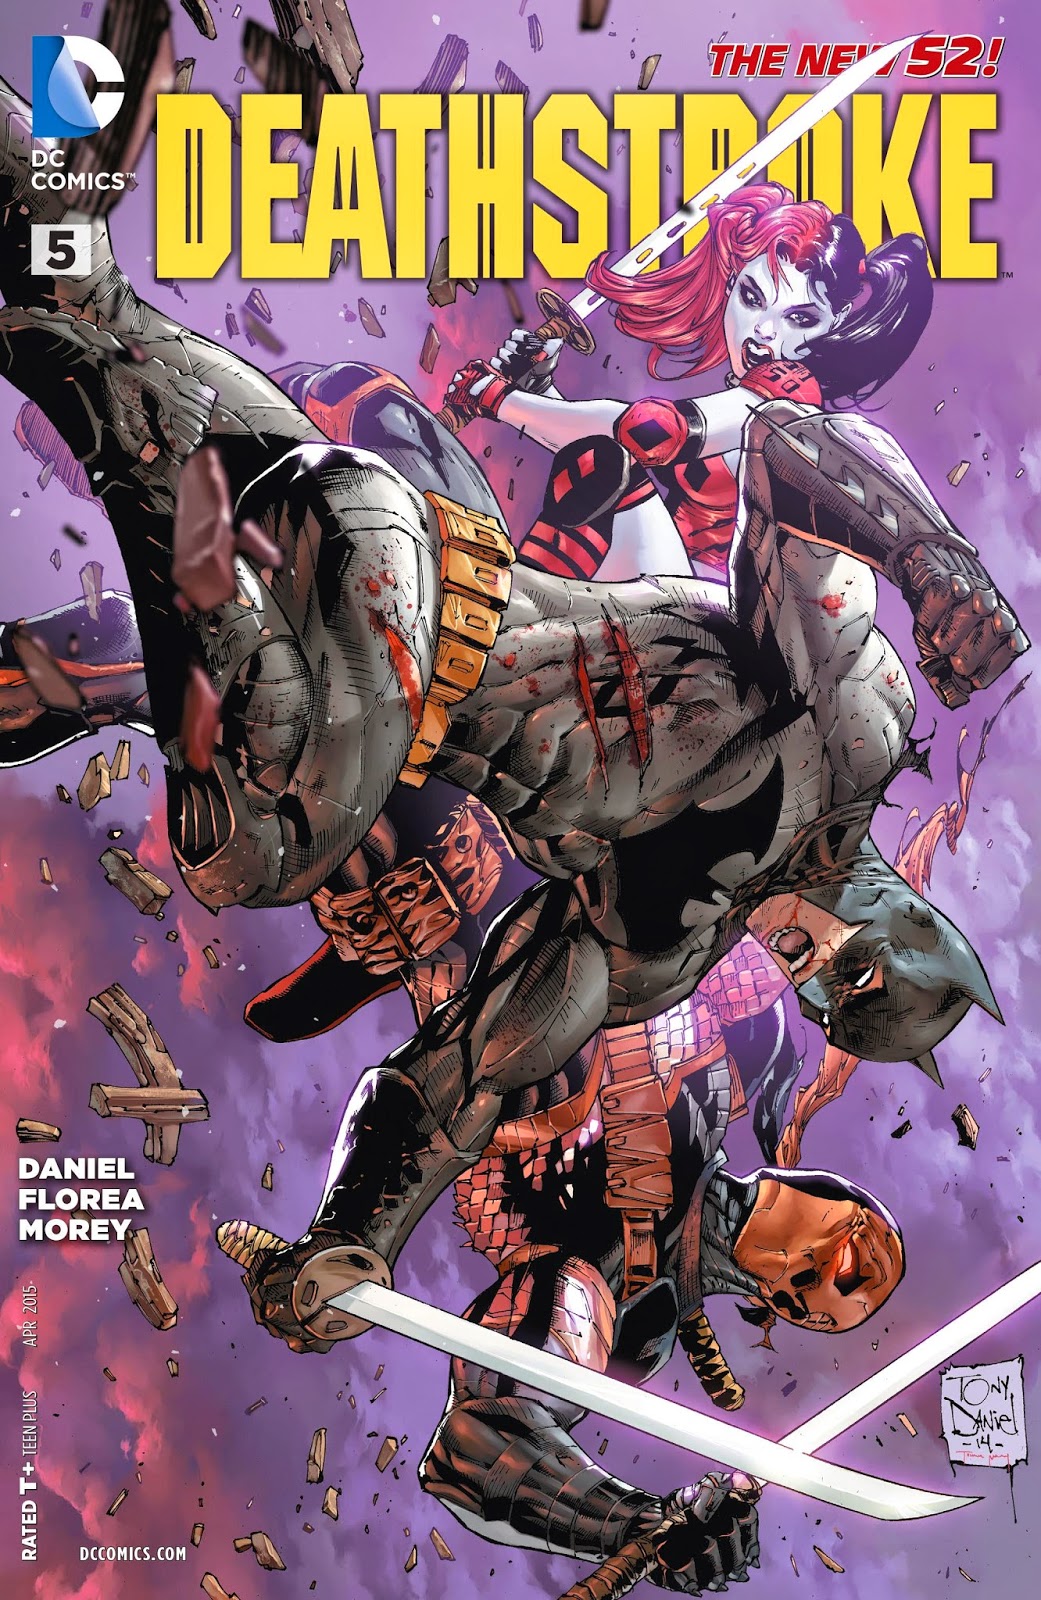 Weird Science DC Comics: Deathstroke #5 Review